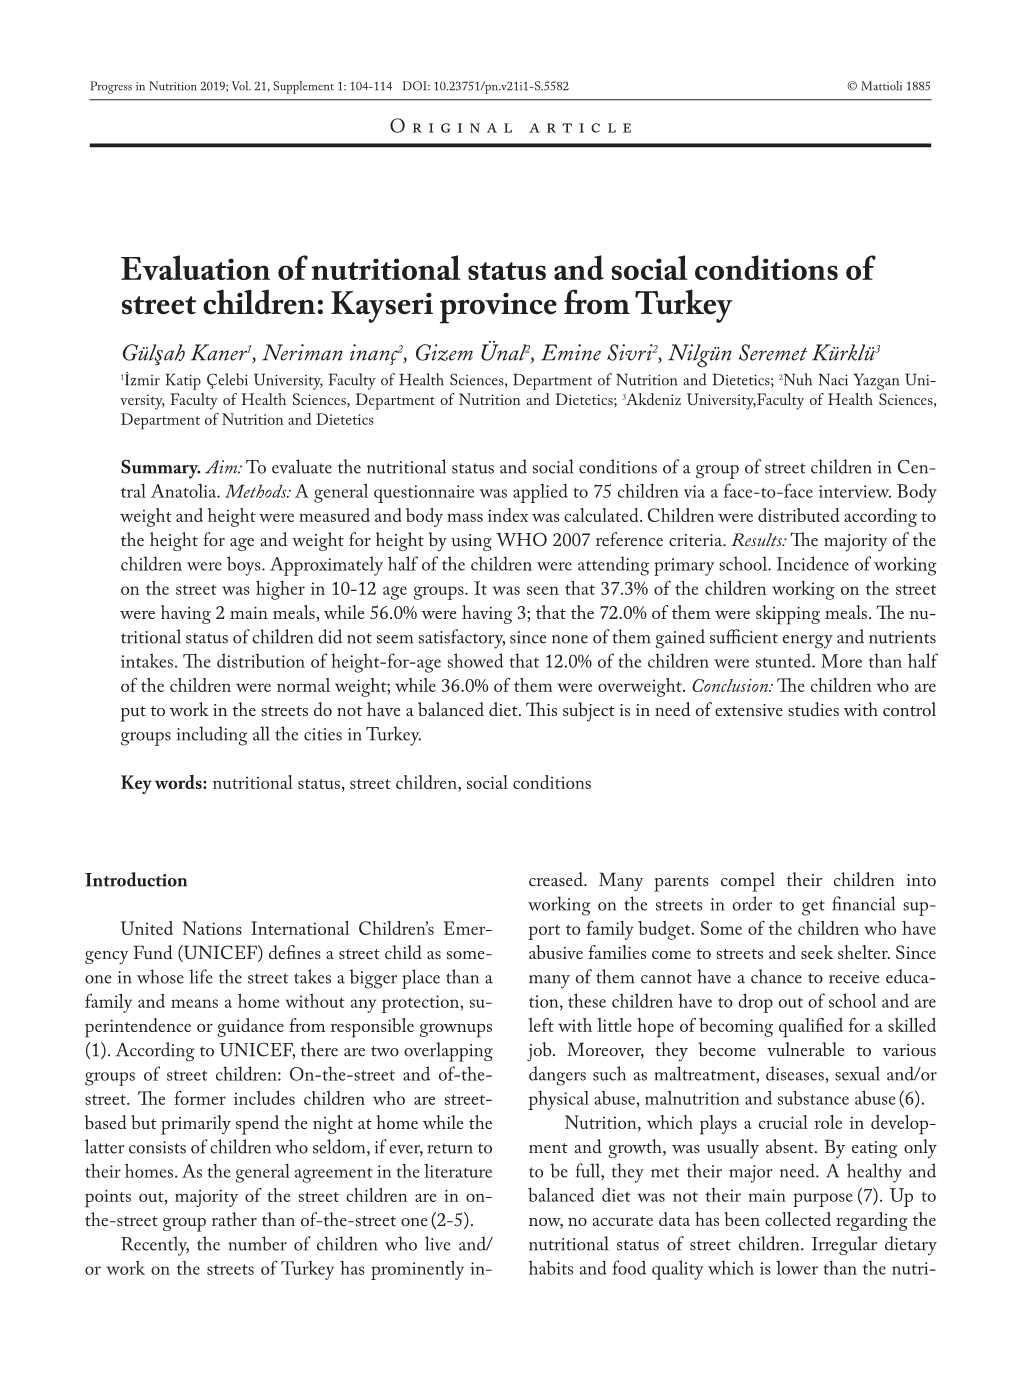 Evaluation of Nutritional Status and Social Conditions of Street Children